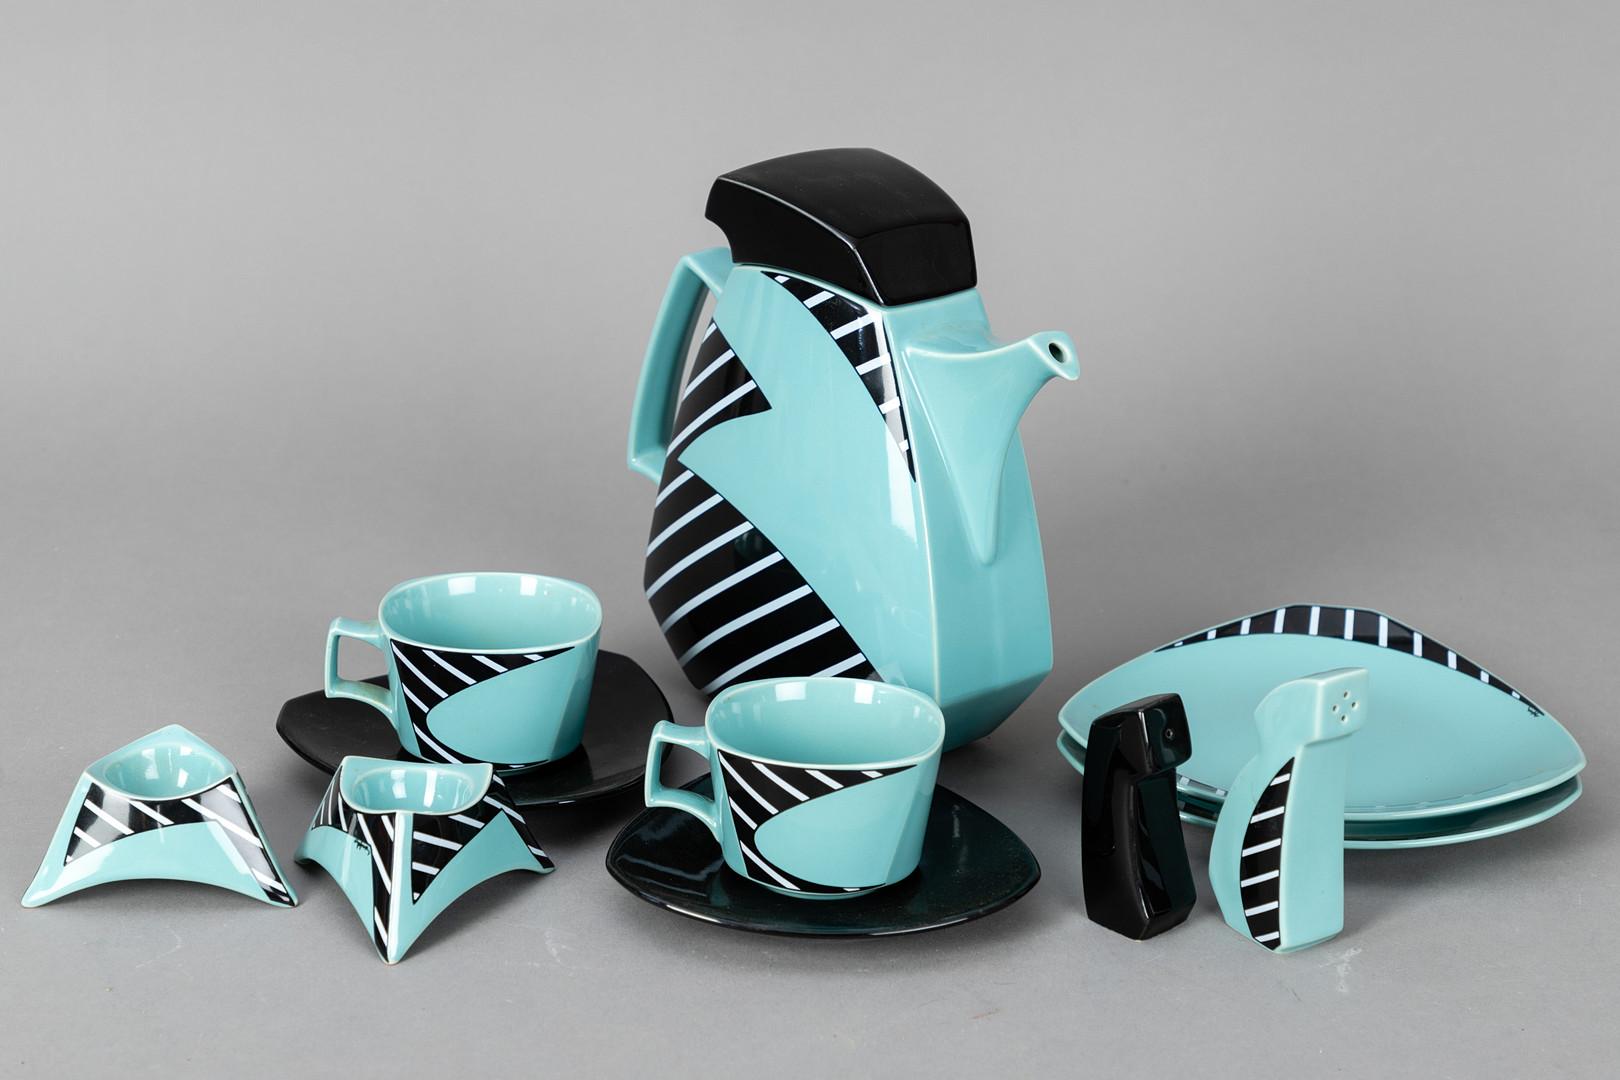 Designed by Dorothy Hafner 1985 for Rosenthal Studio-Line Germany. Porcelain, mint green and black glazed, 11 pieces,
1 x coffee pot, 
2 x coffee cup with saucers, 
2 x plates, 
2 x egg cups, 
pepper and salt shakers. 
Inscribed on the underside.